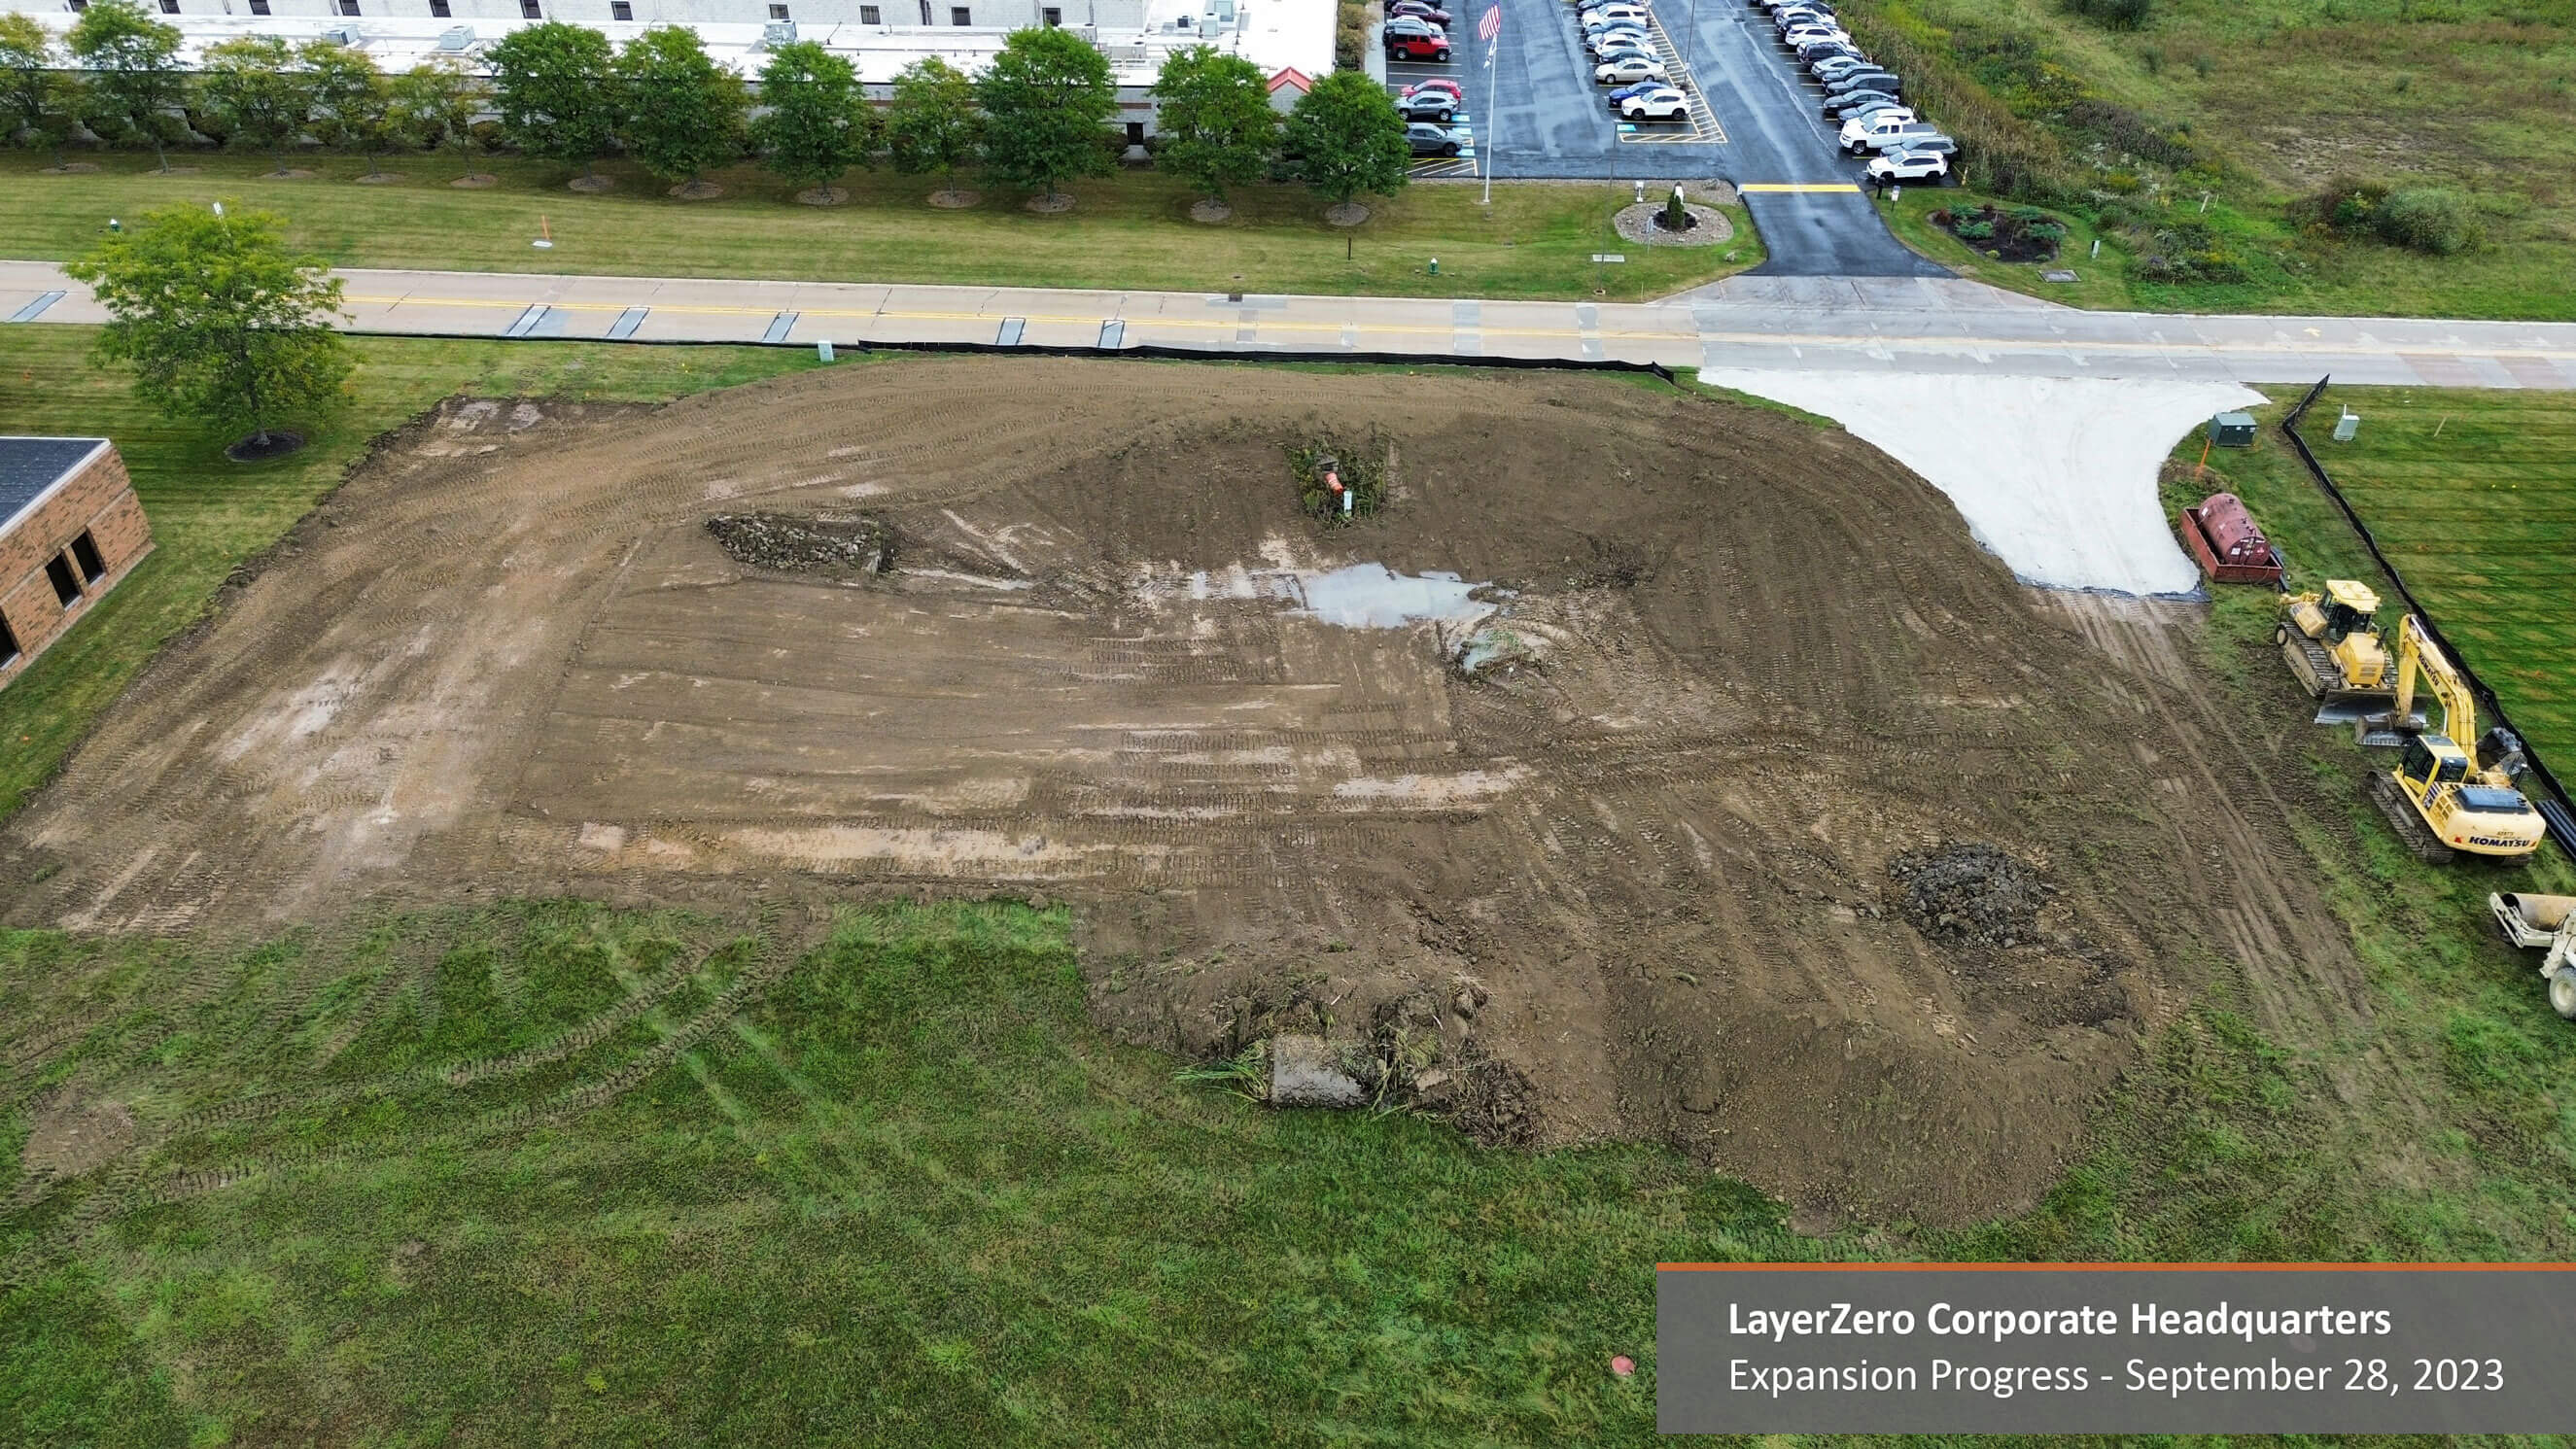 Groundbreaking has started on the LayerZero expansion project